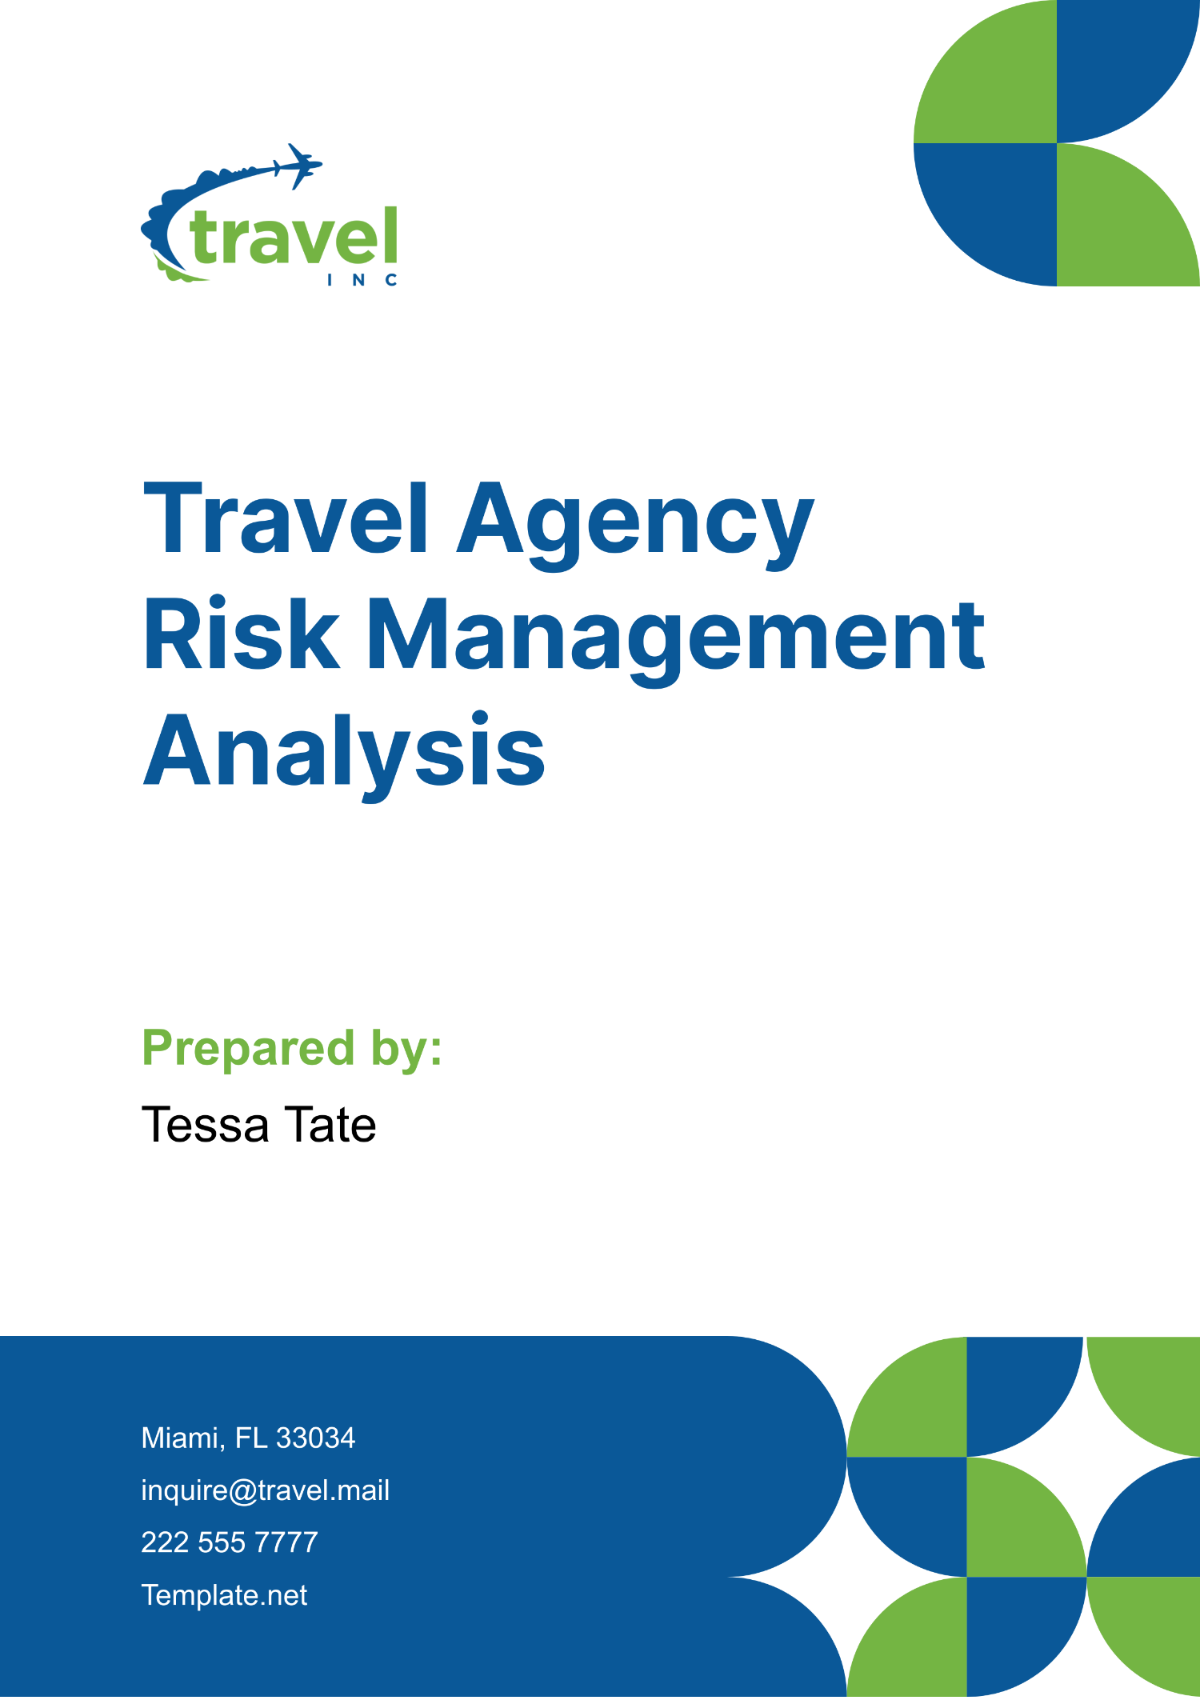 Travel Agency Risk Management Analysis Template